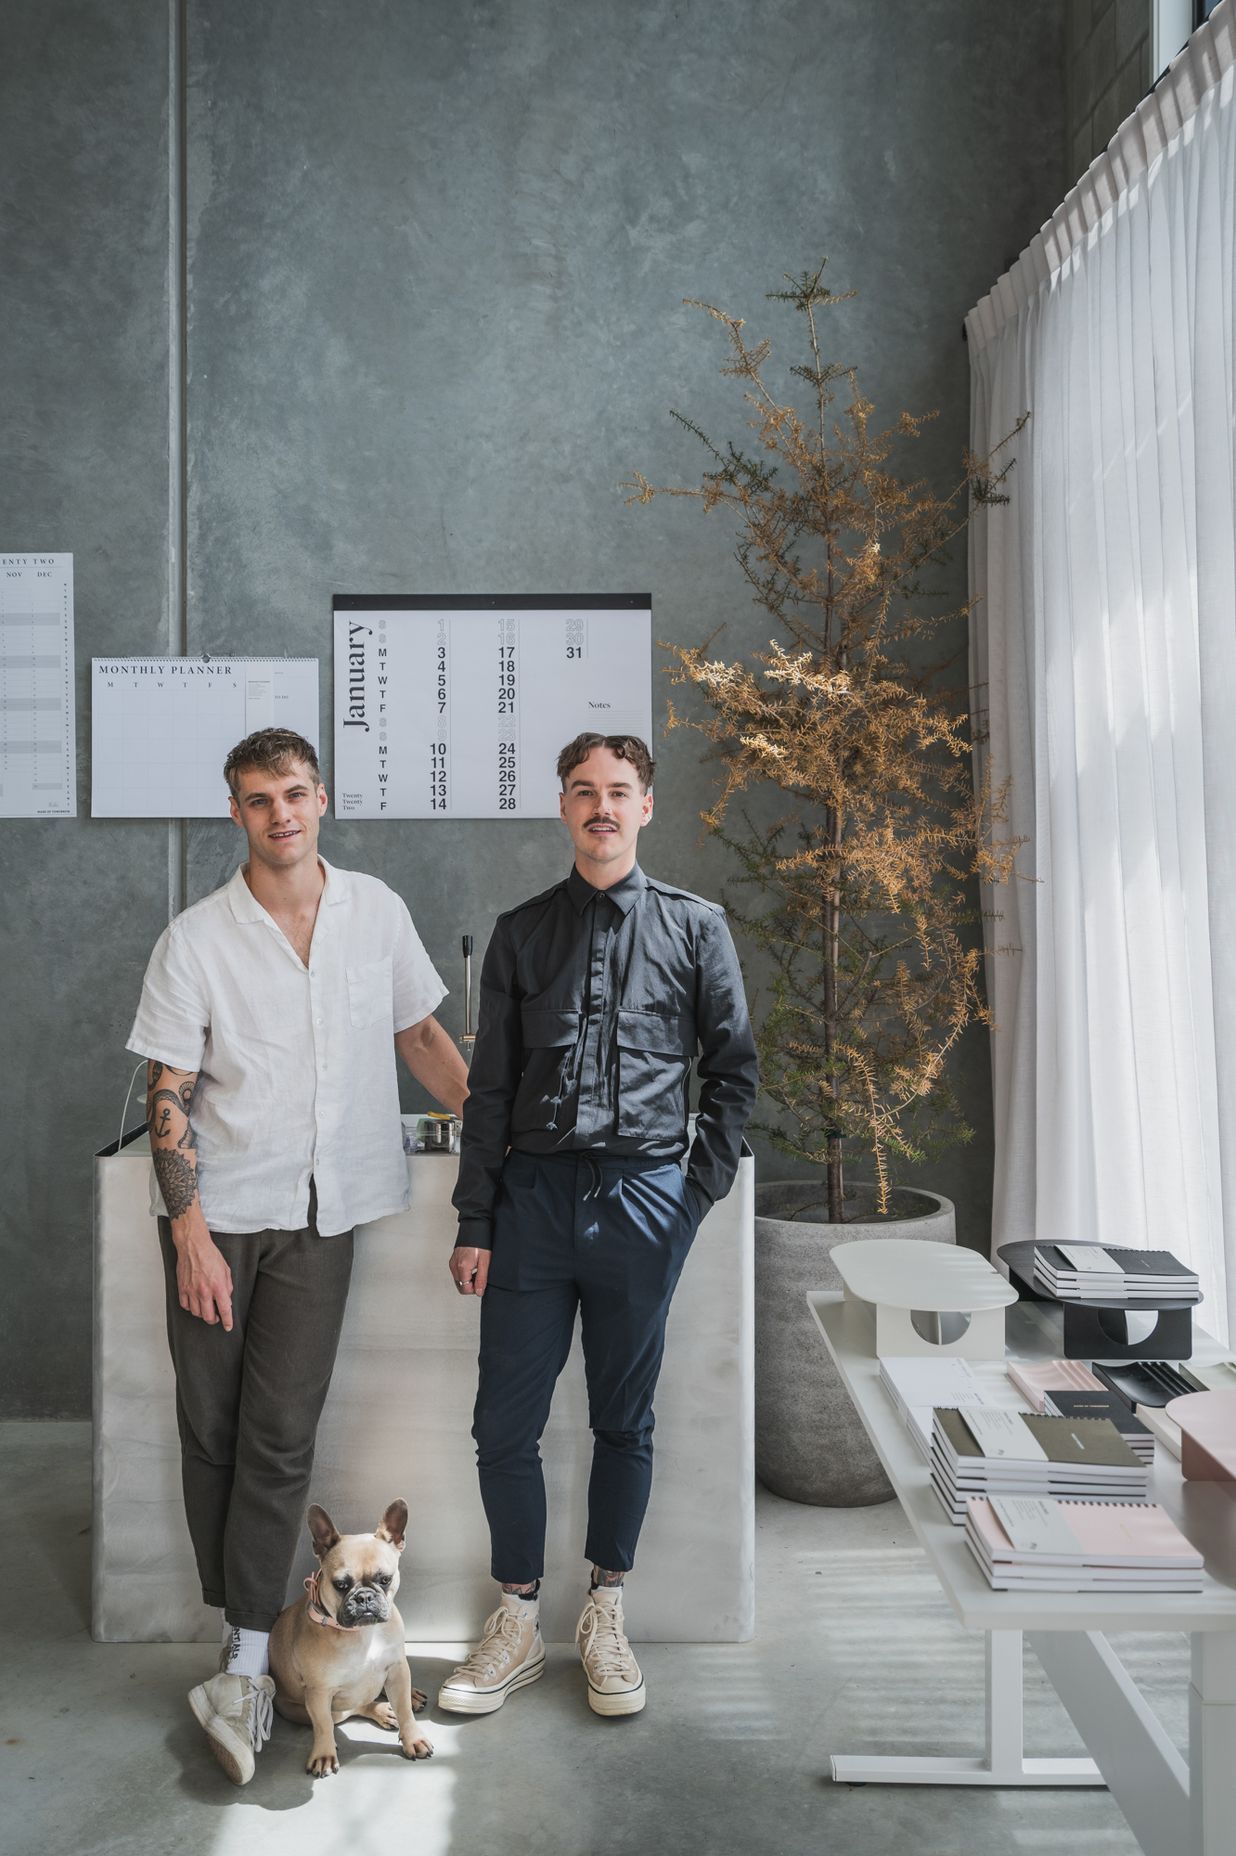 Matt and Dan are the faces behind homewares brand Made of Tomorrow.